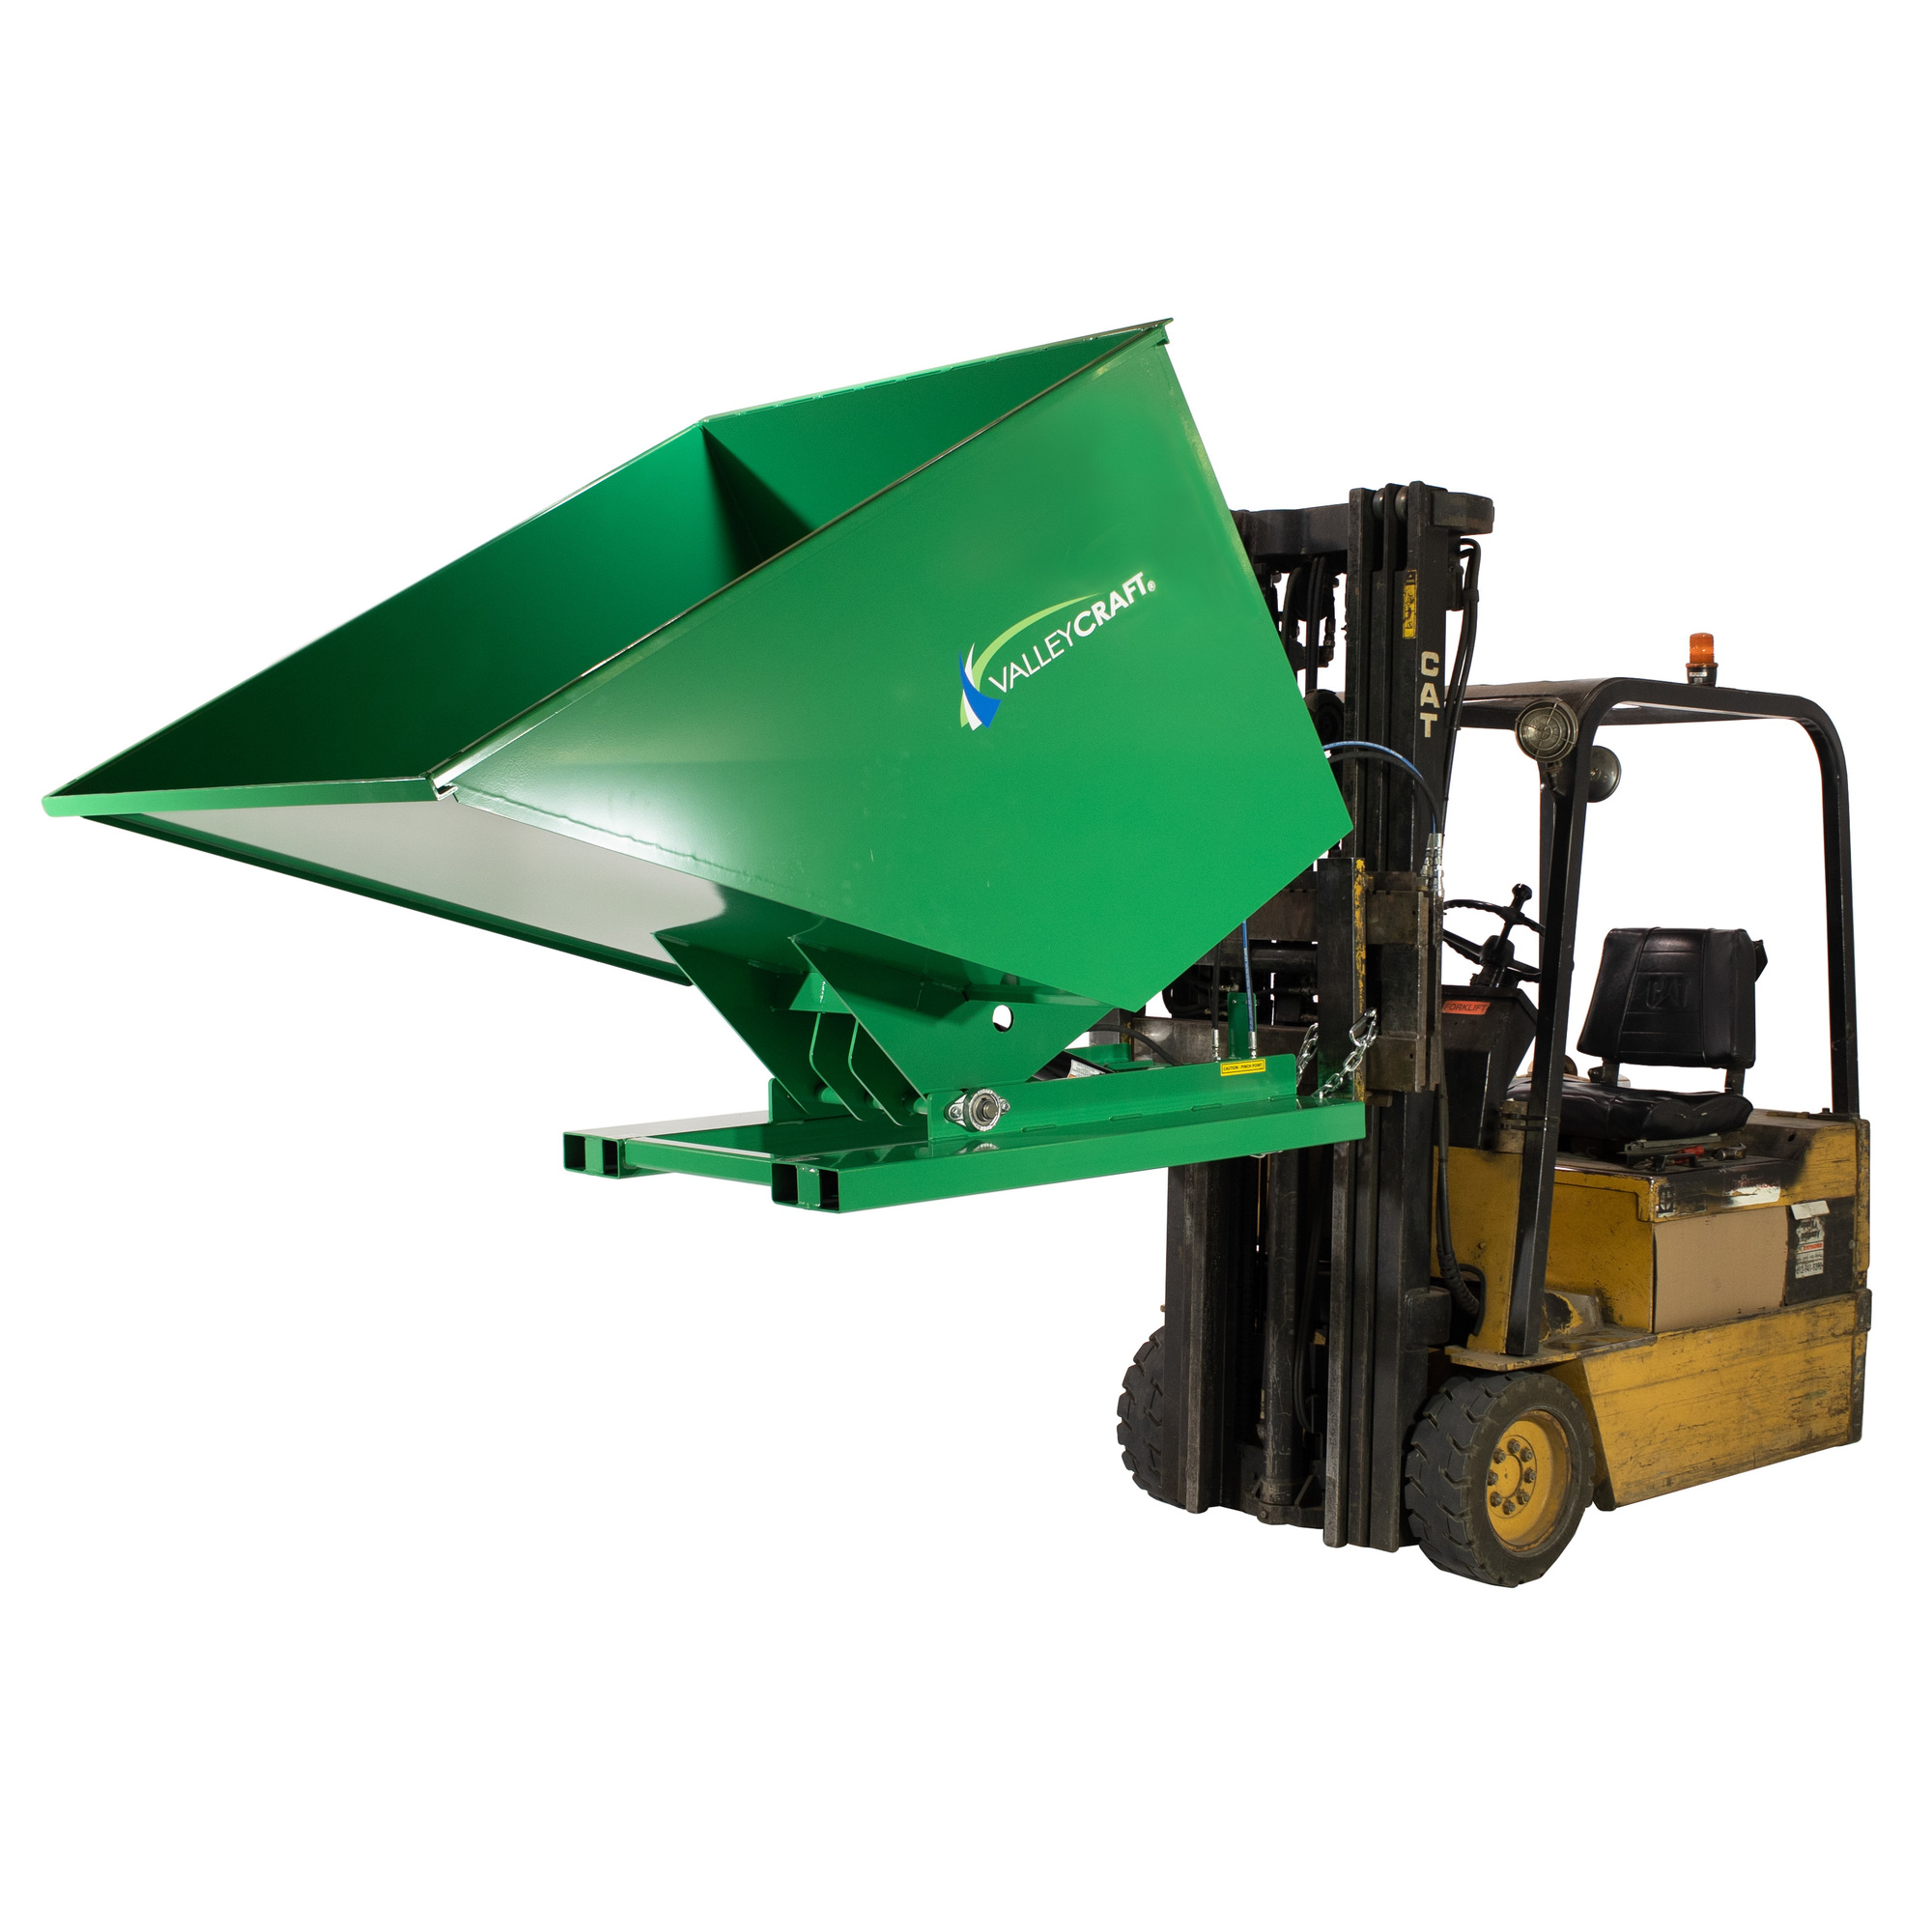 Valley Craft, Powered Self-Dumping Hopper Forklift Attachment, Capacity 4000 lb, Volume 2 ydÂ³, Color Green, Model F89140